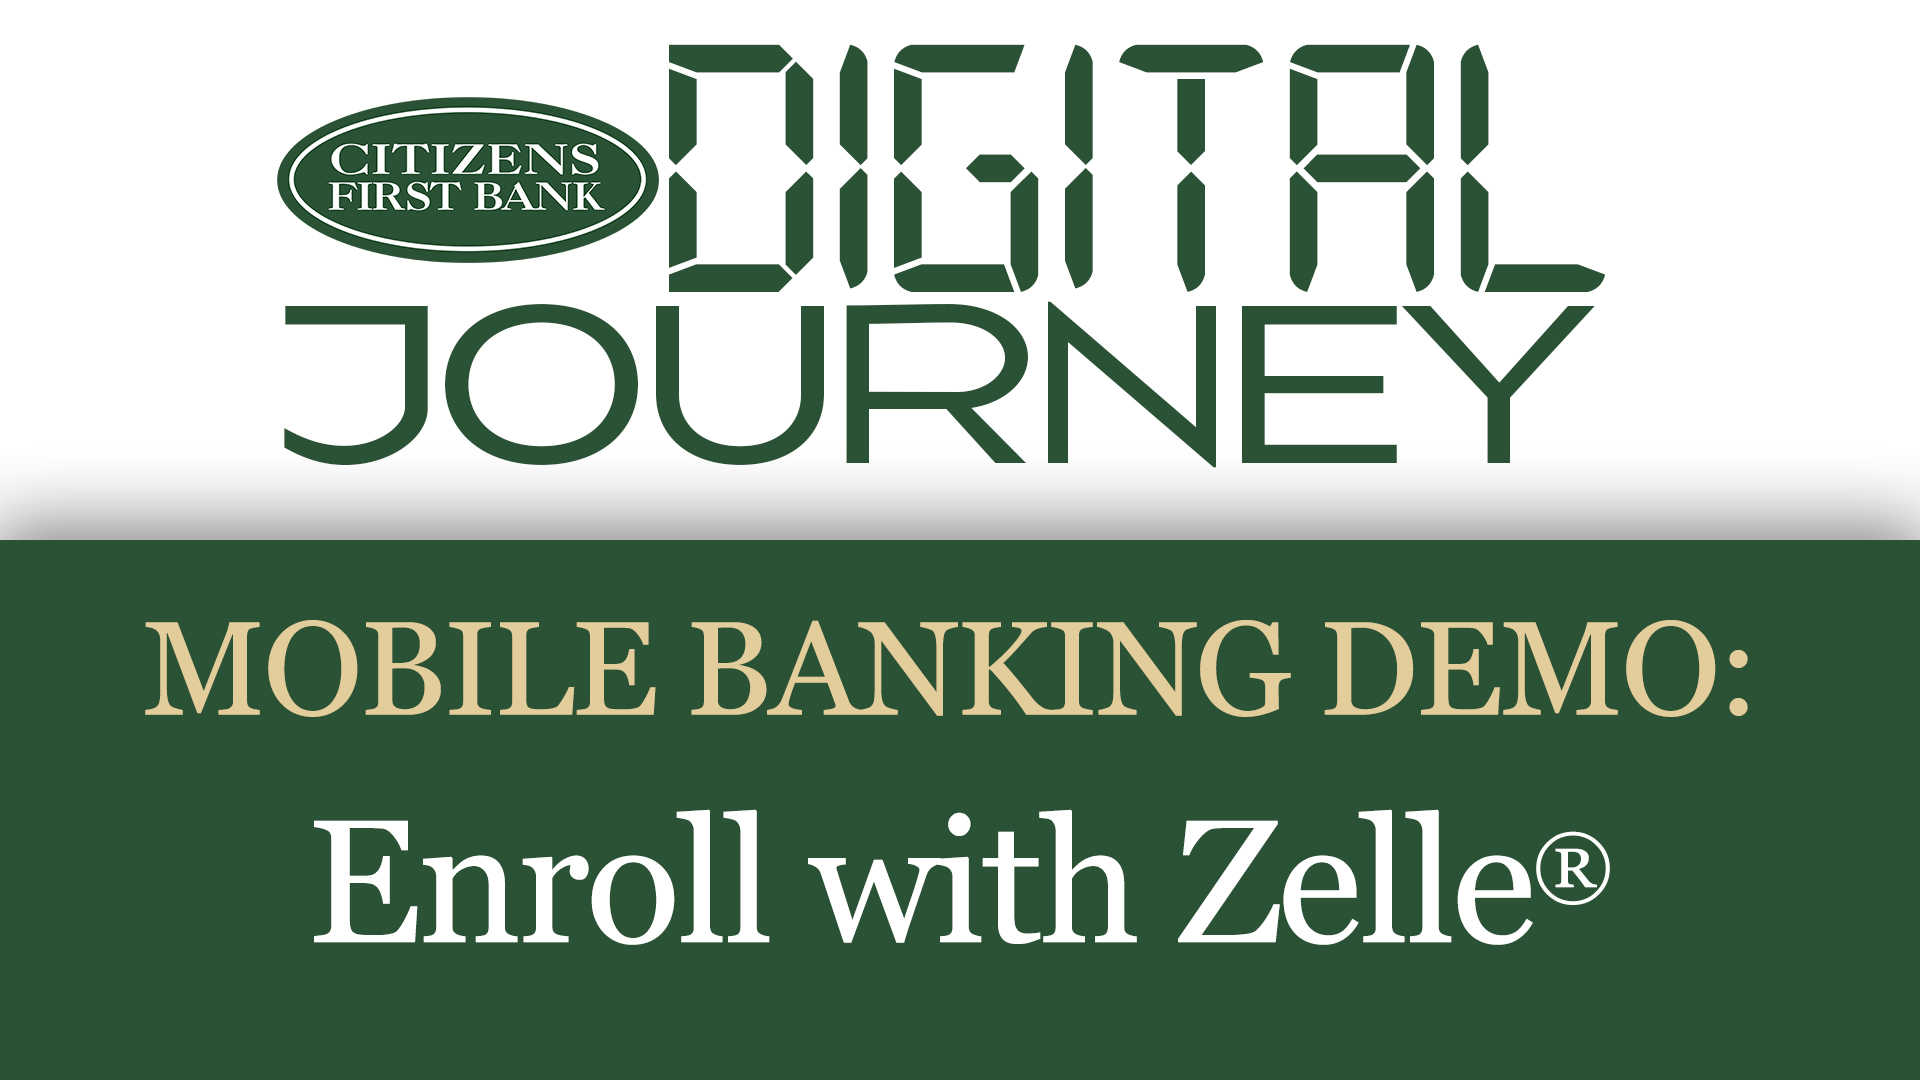 Digital Journey logo with our mobile banking demo: Enroll with Zelle®